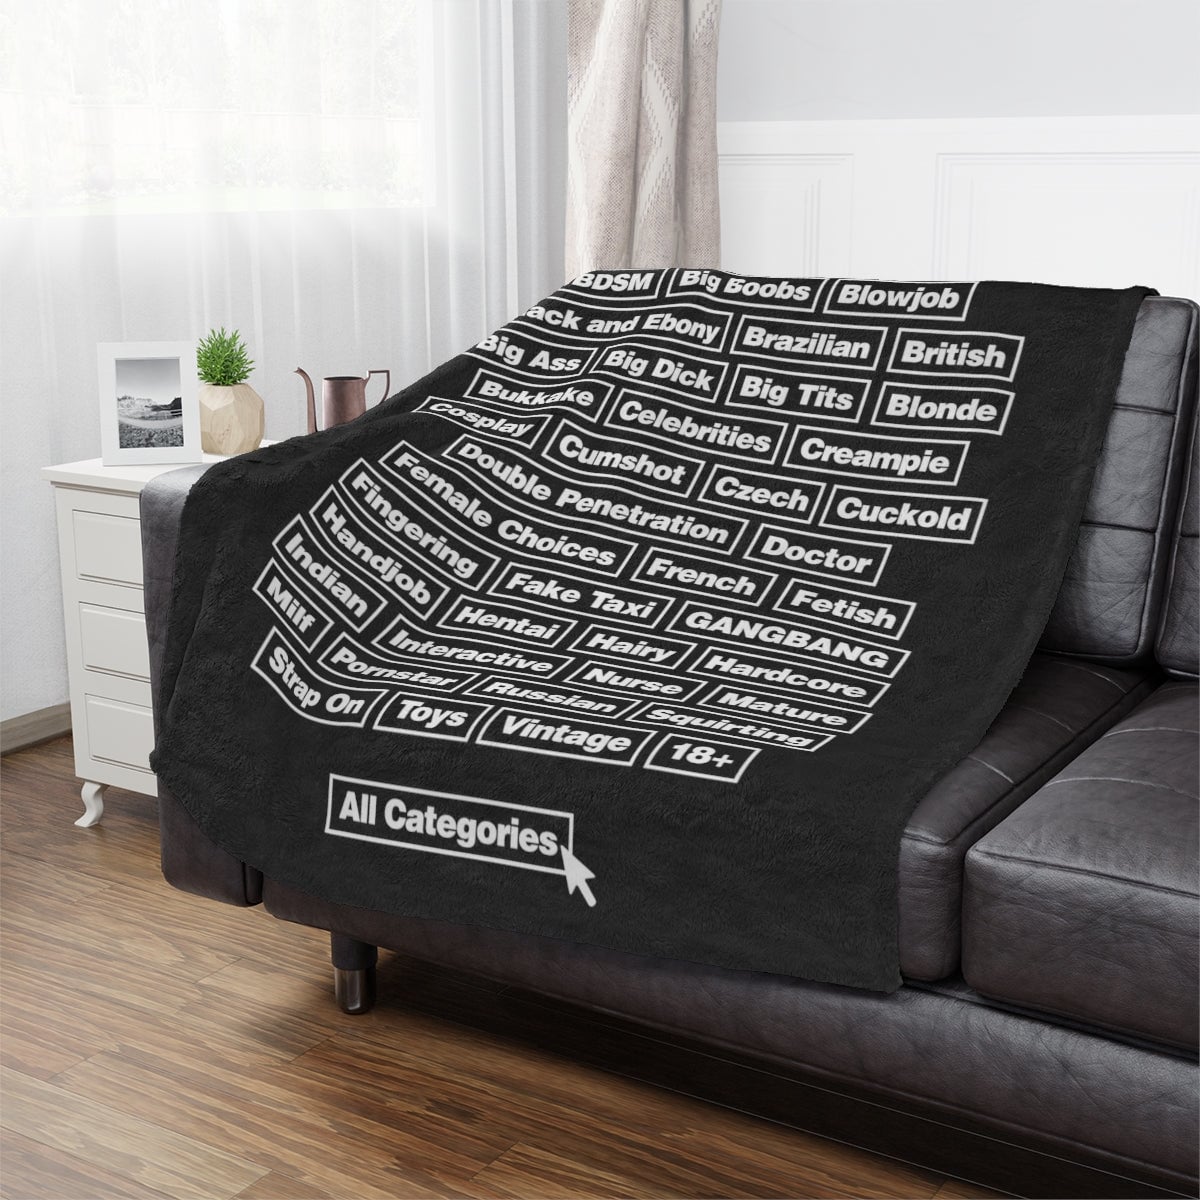 Upgrade Your Space with All Search Categories Minky Blanket